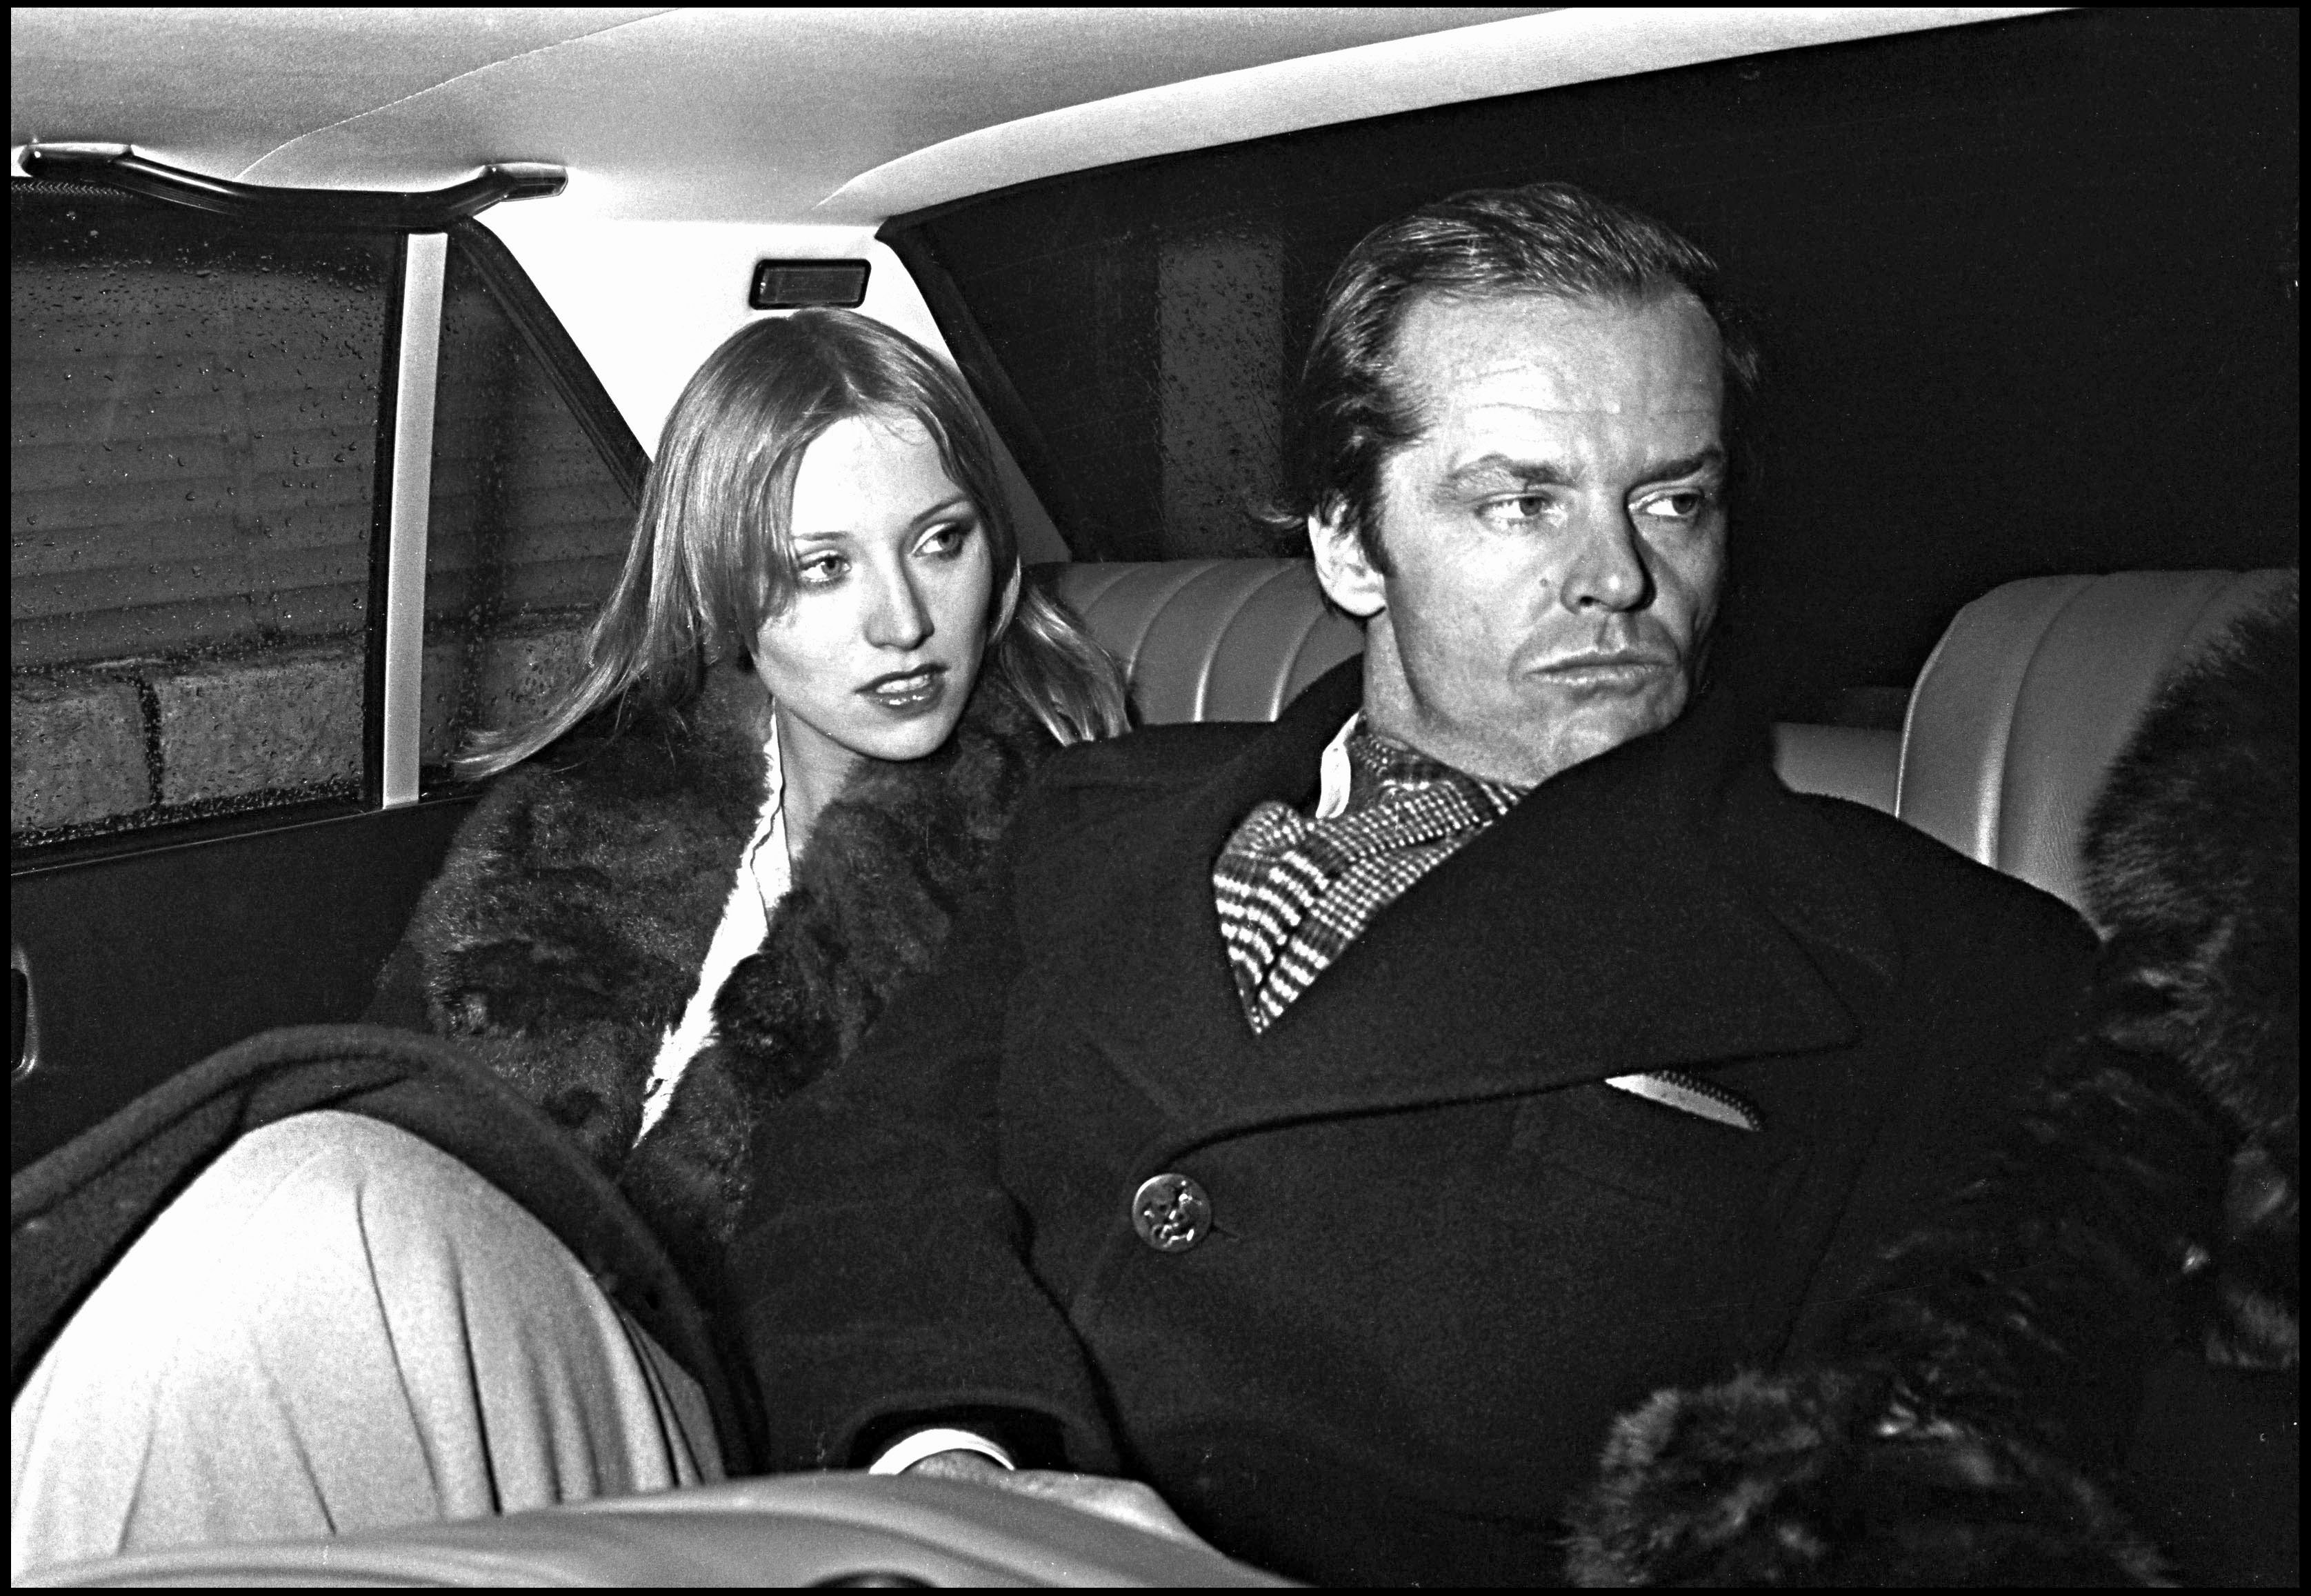 Jack Nicholson and his friend Winnie Hollman on February 16, 1976 in Paris for the movie "One Flew Over the Cuckoo's Nest"  | Source: Getty Images